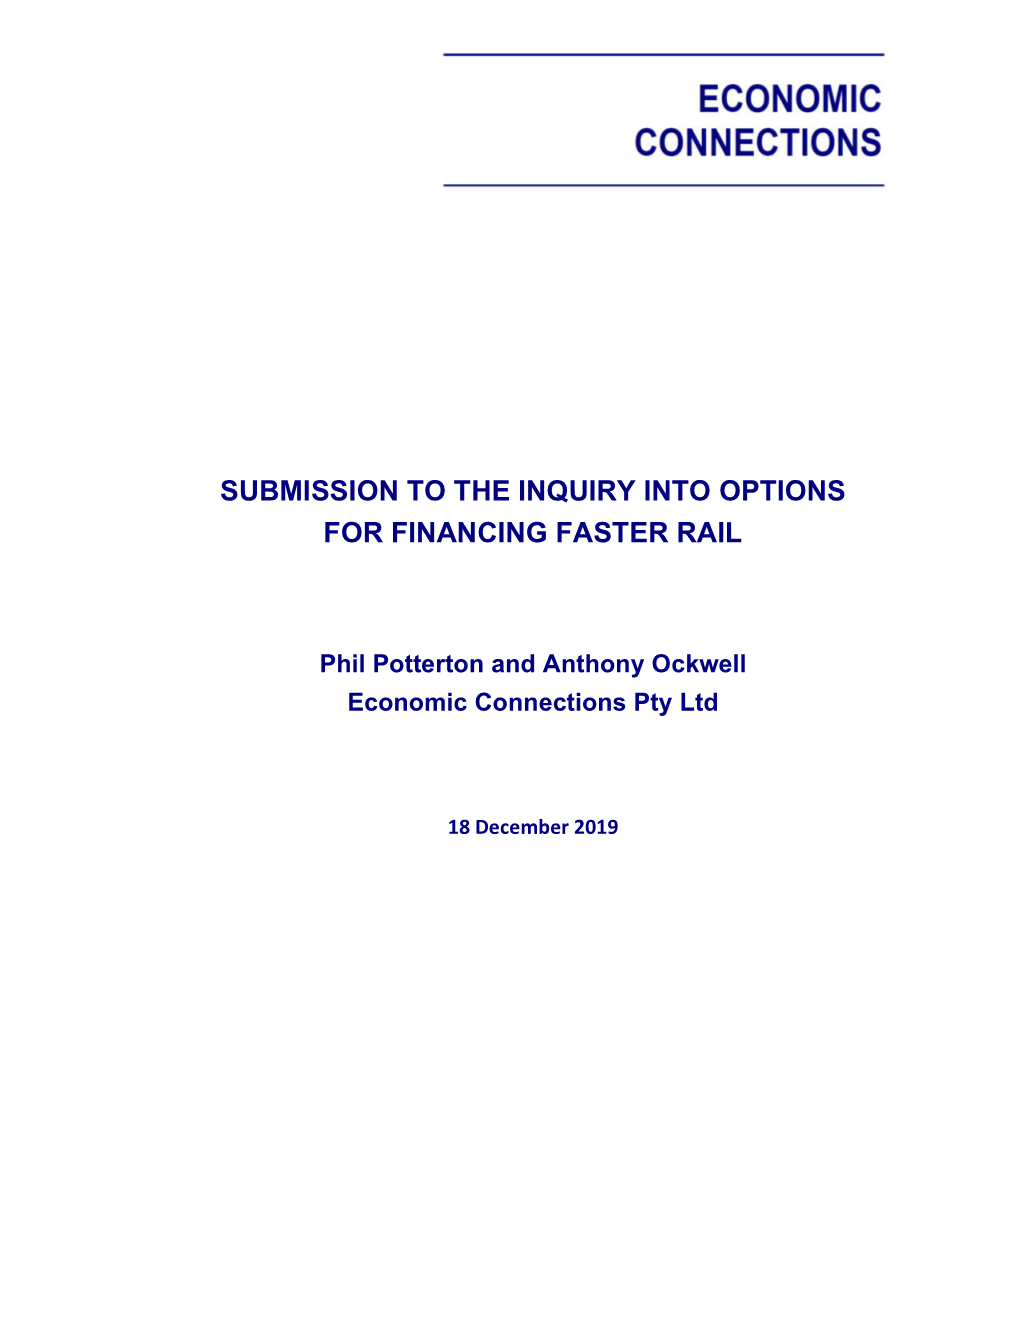 Submission to the Inquiry Into Options for Financing Faster Rail